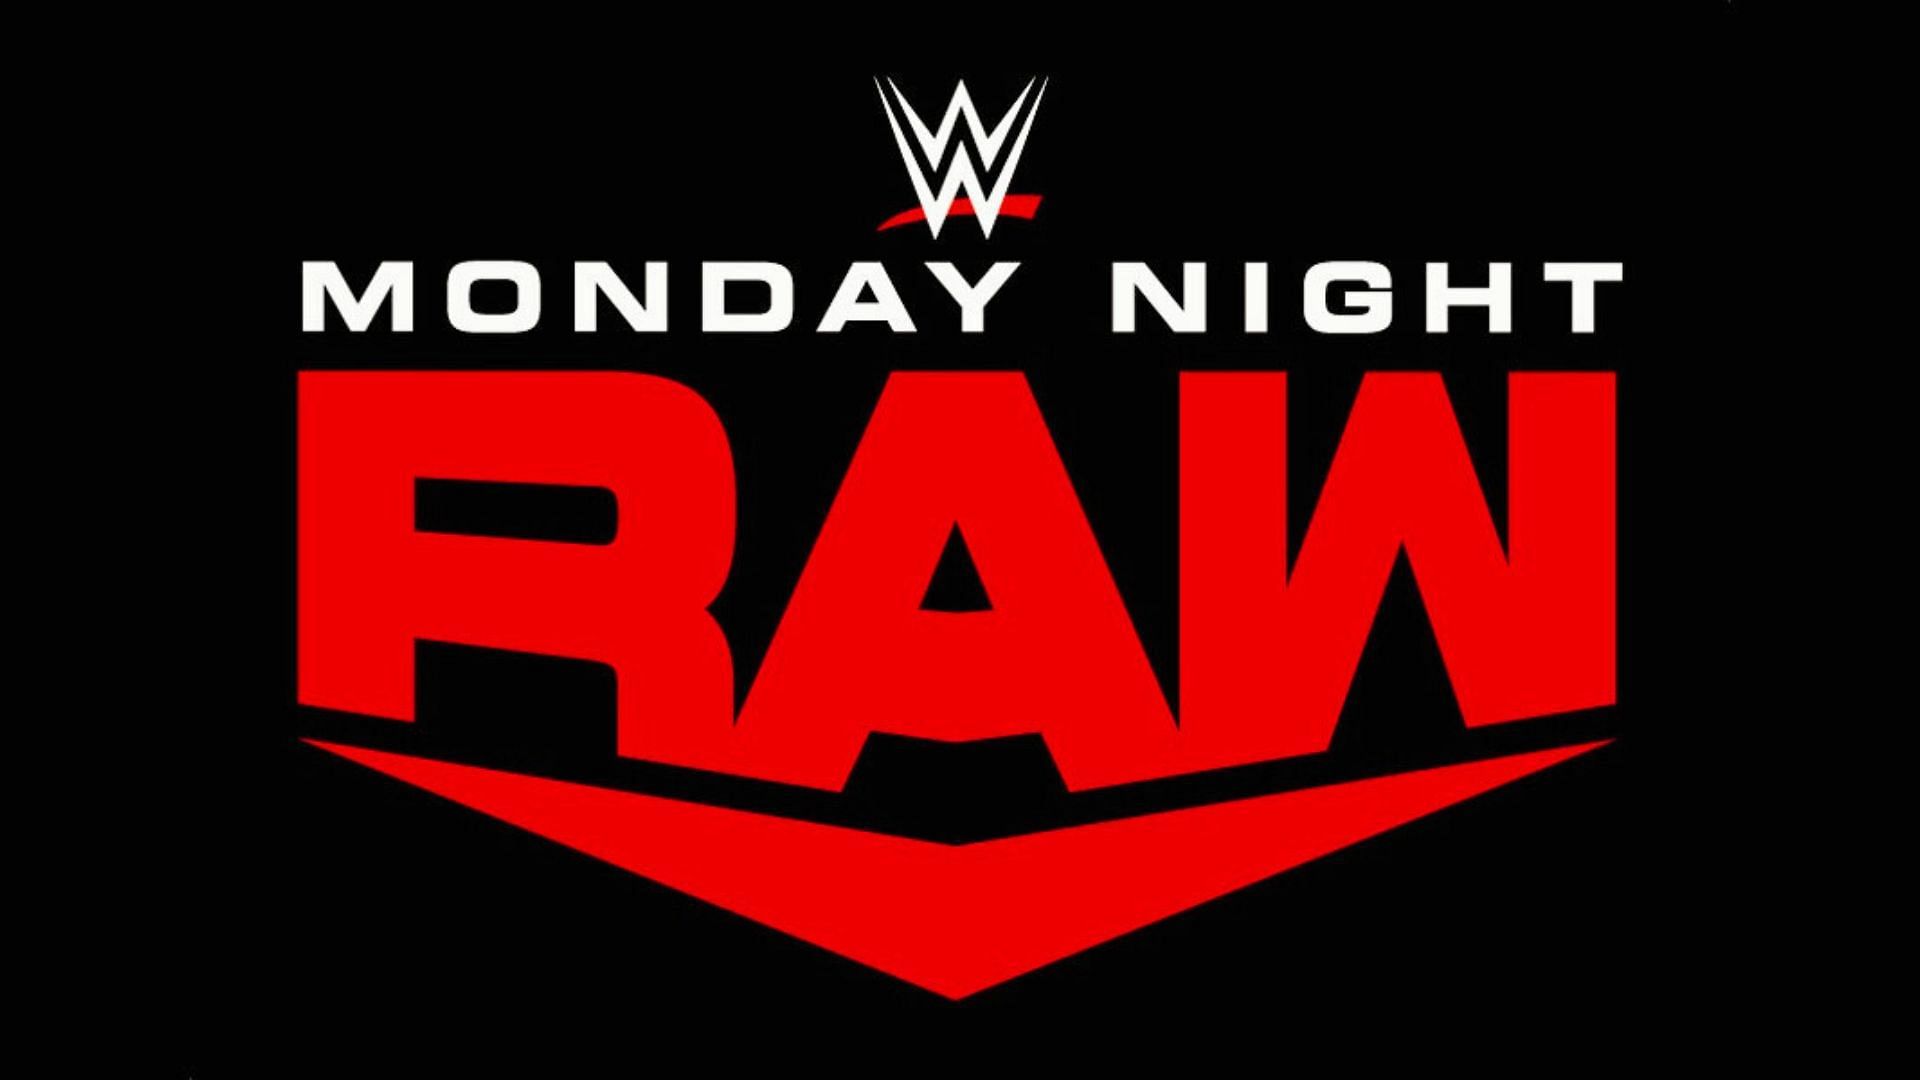 WWE RAW is gearing up to crown a new World Heavyweight Champion!